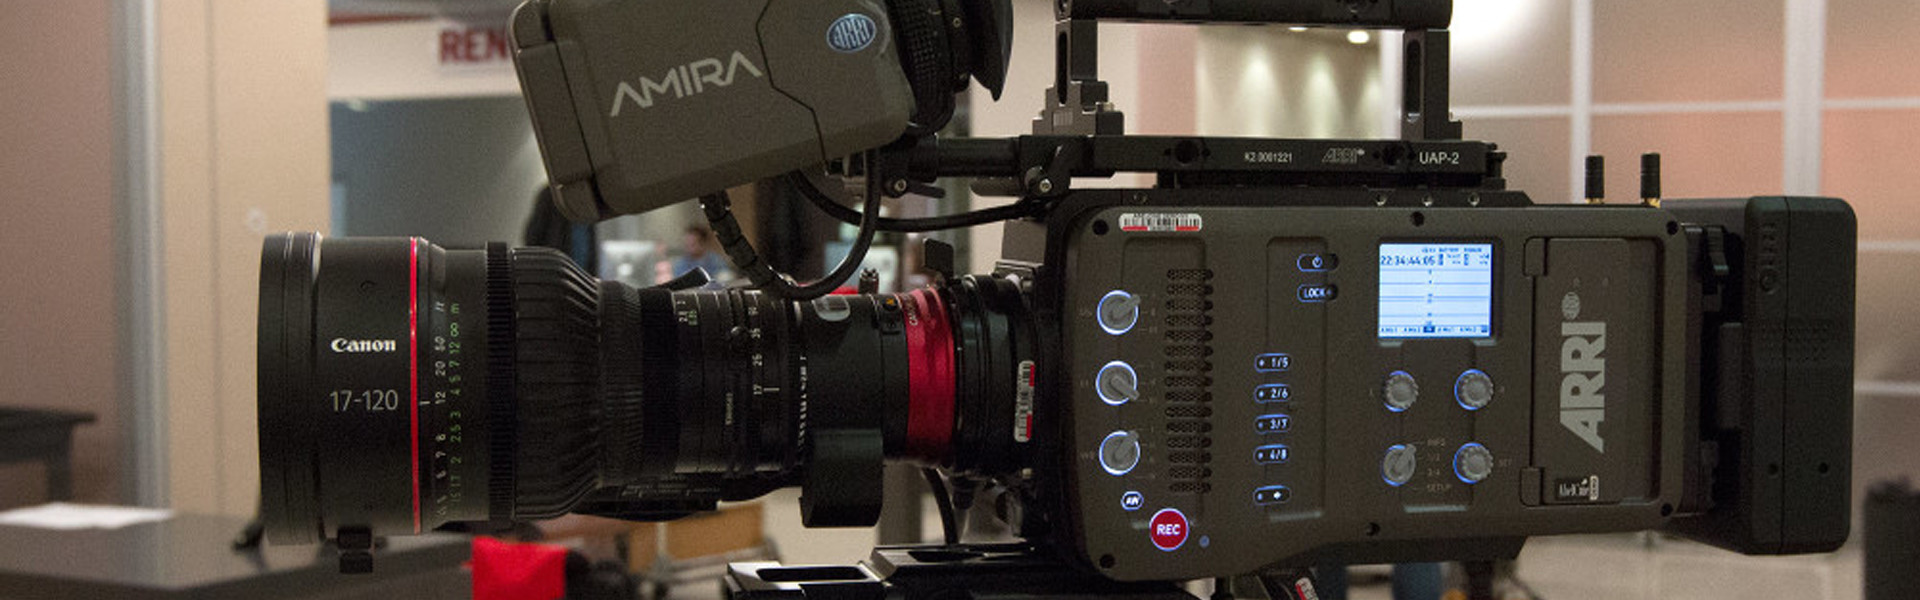 Header image for article Now Available in AbelCine Rental: AMIRA & Canon 17-120 Cine-Servo